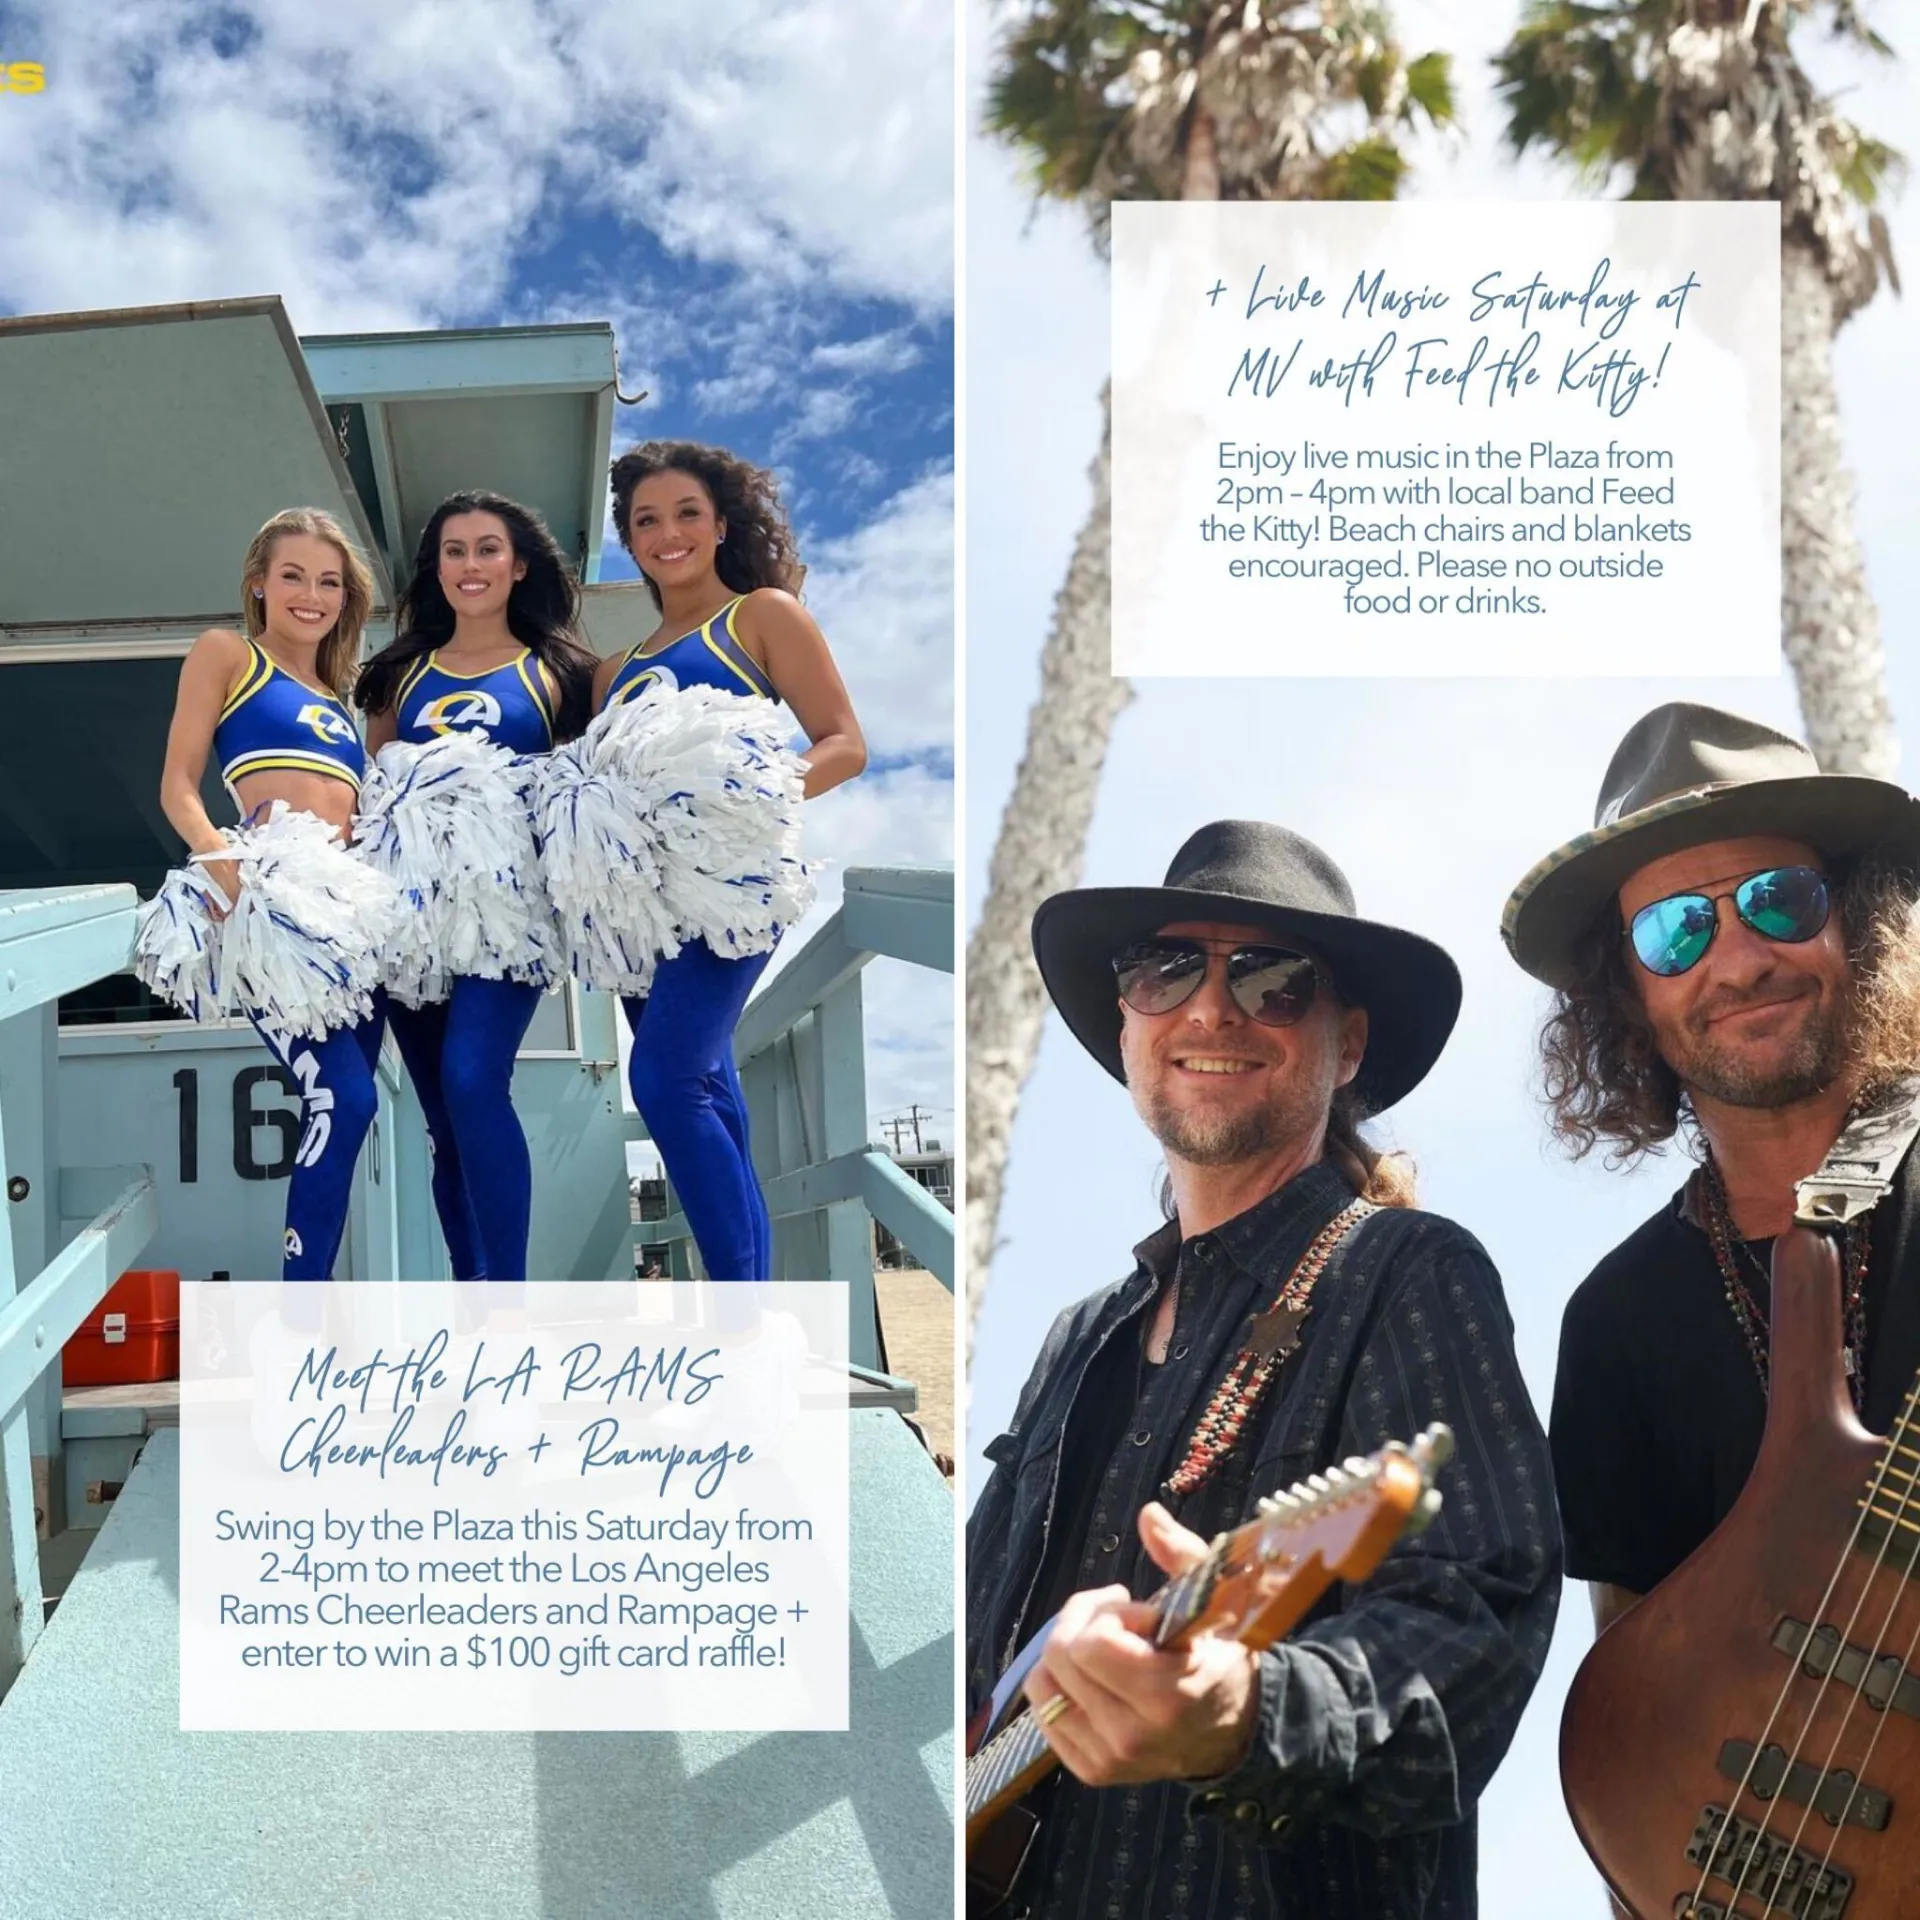 On the left, LA Rams cheerleaders at the beach with text below. On the right, Feed the Kitty band with text above.